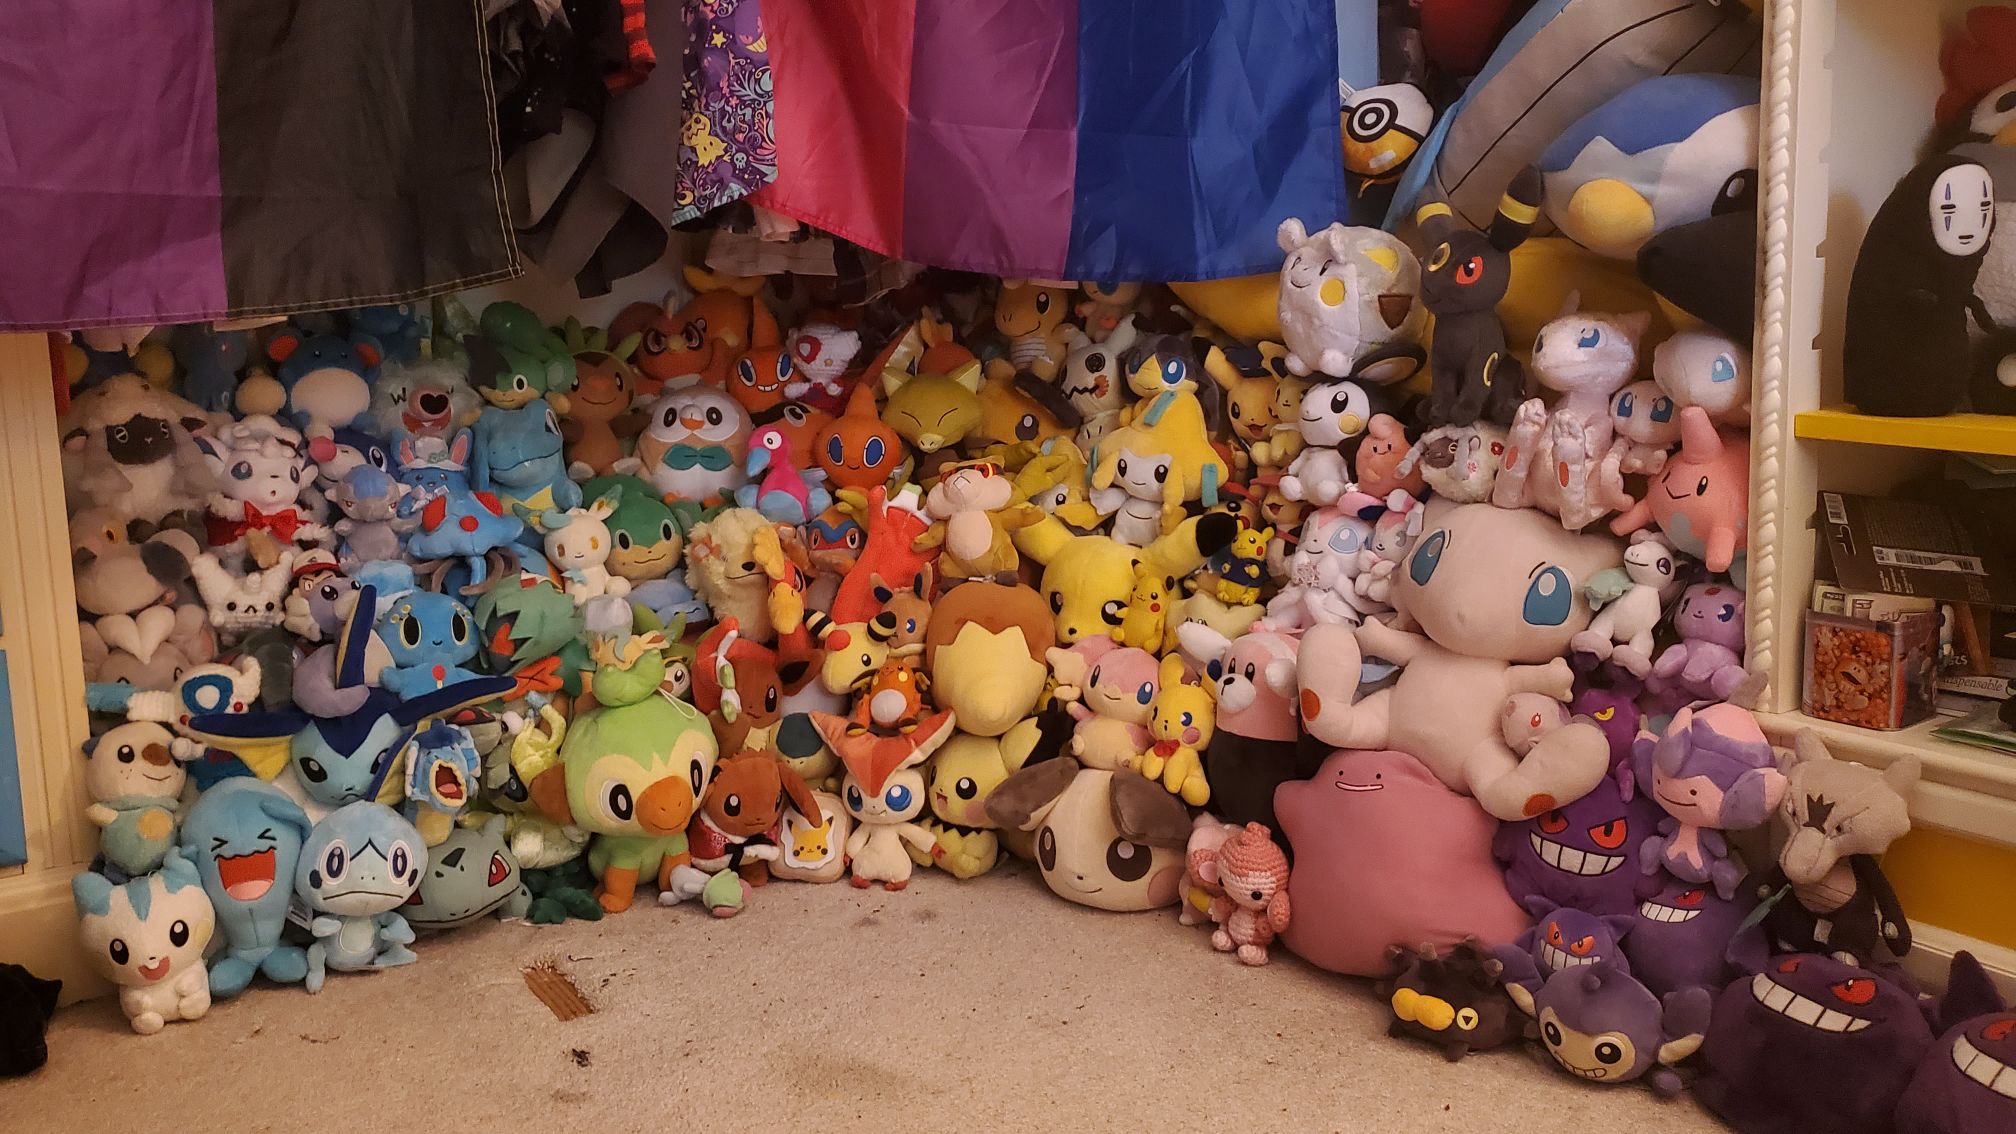 huge pile of pokemon plush, with a bisexual flag in the background